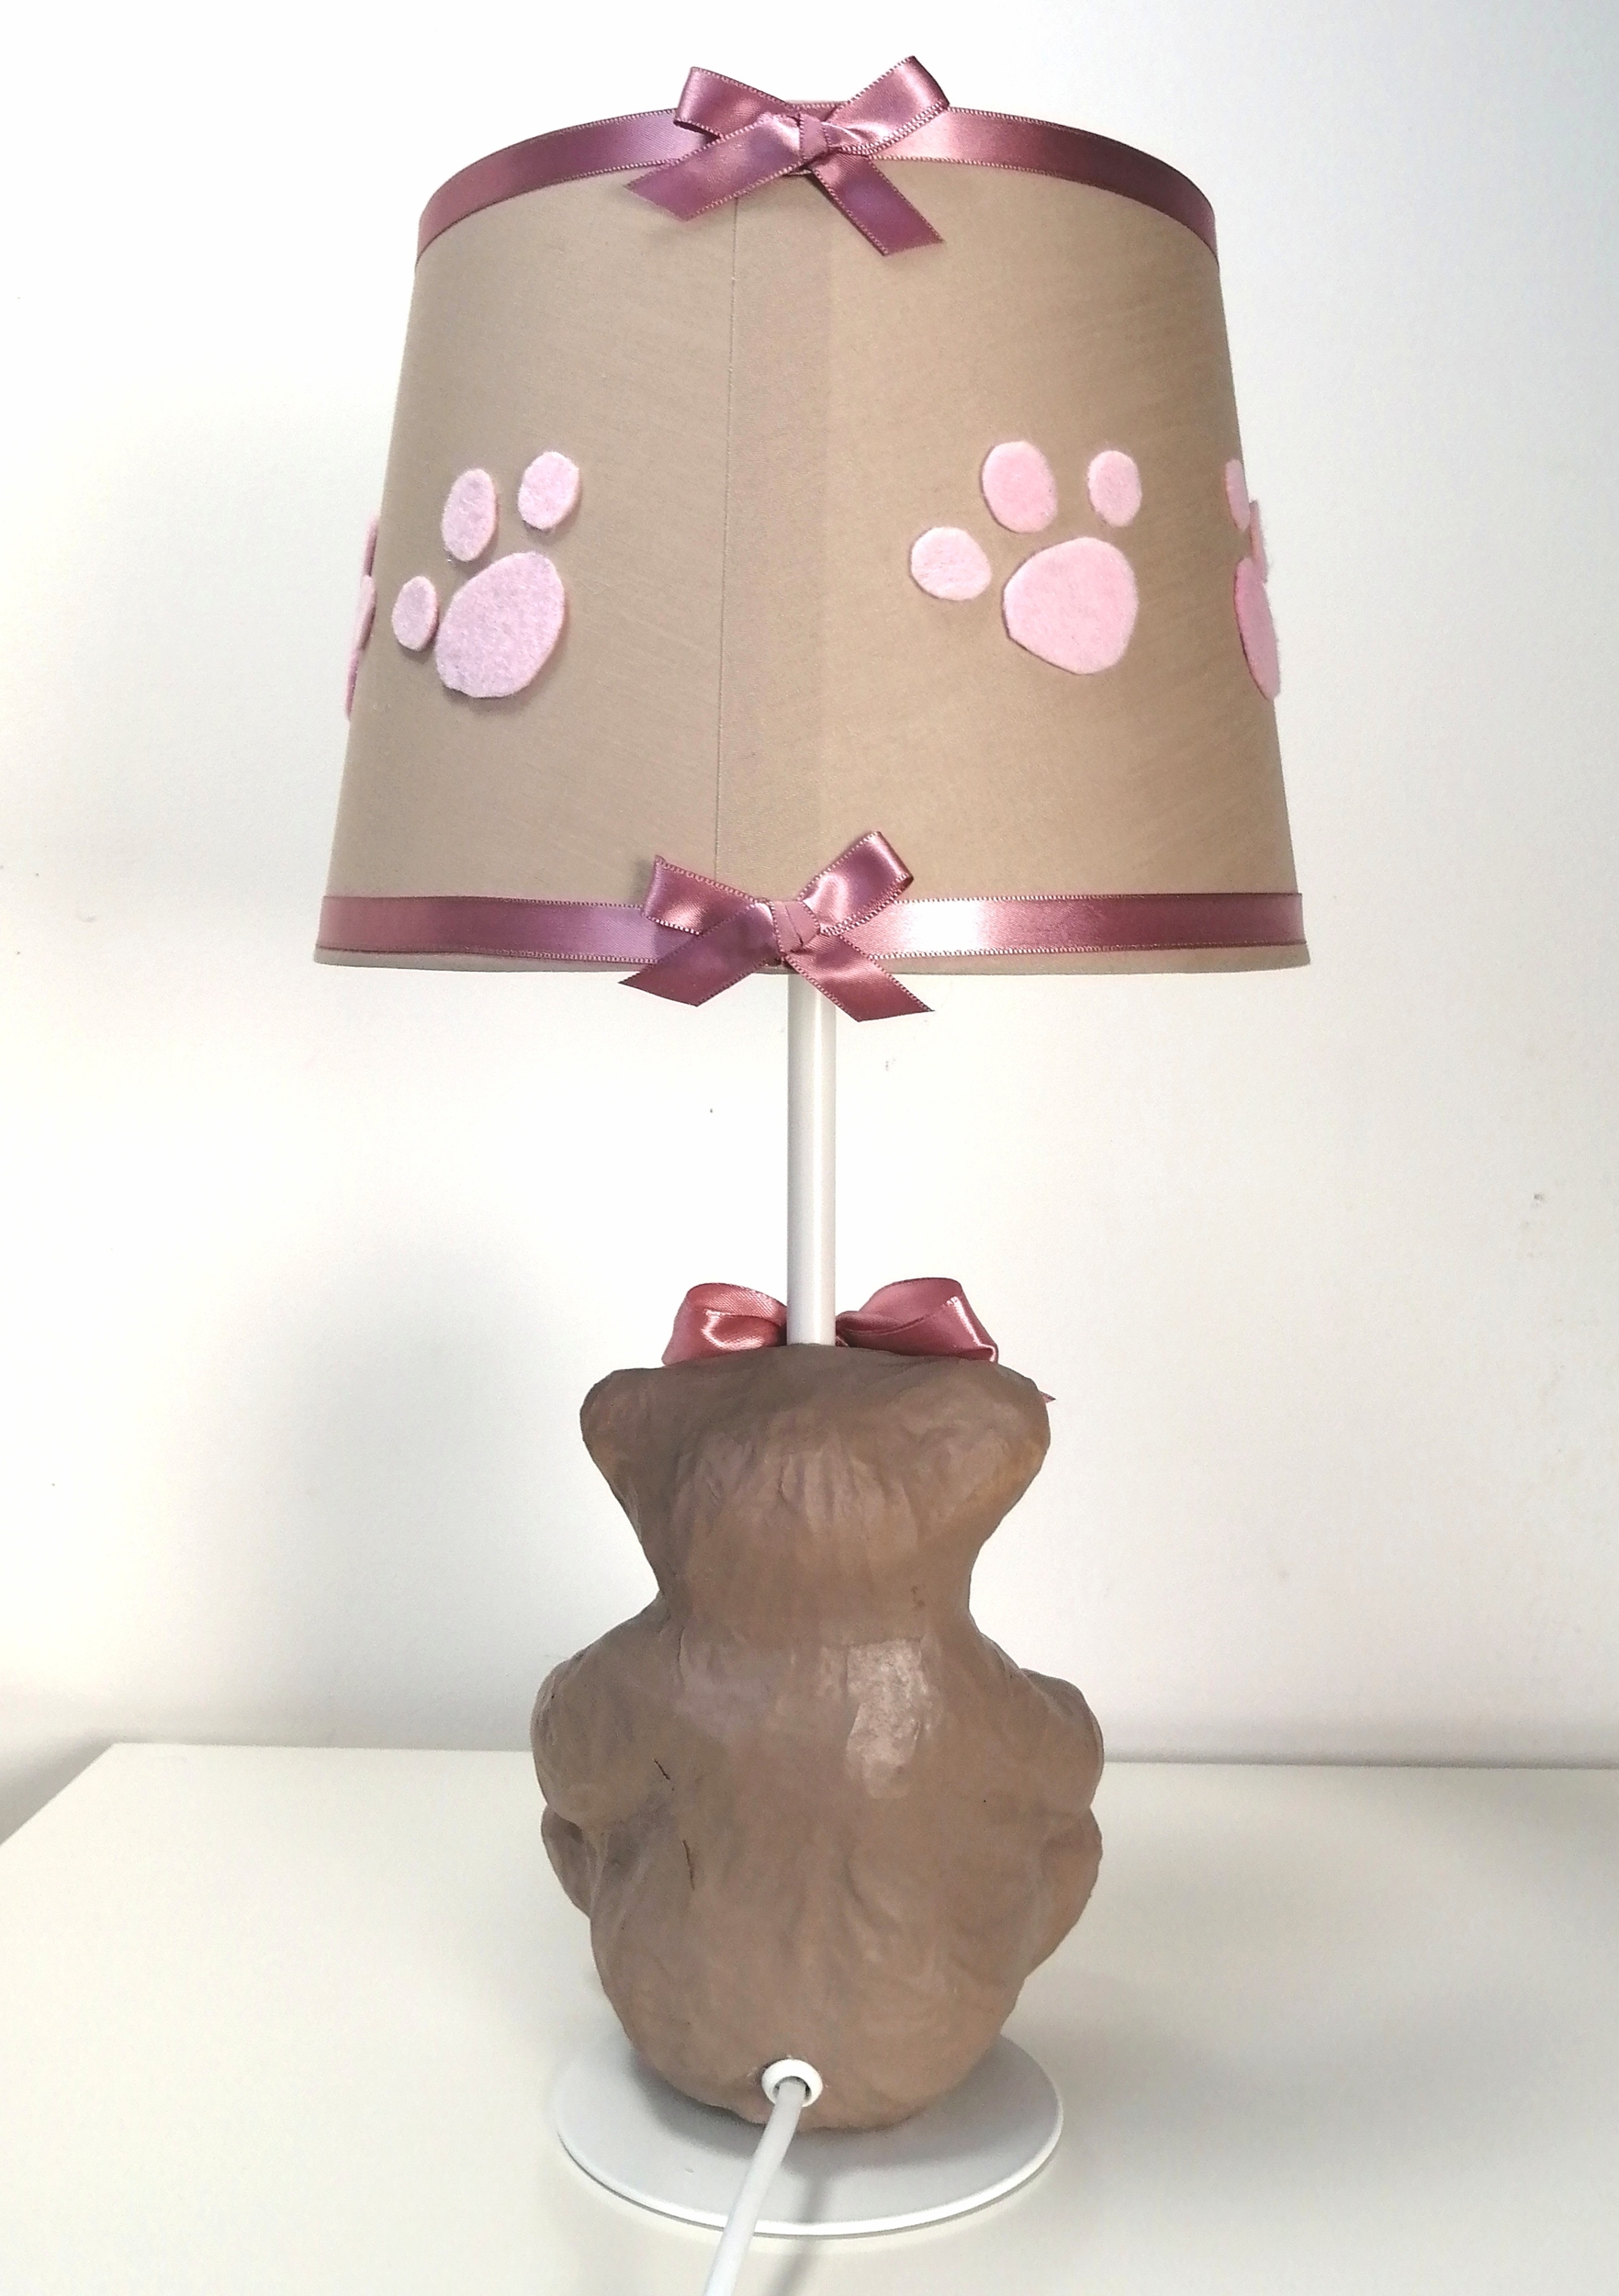 lampe-chevet-enfant-bebe-ours-taupe-rose-pastel-vieux-rose-forme-ours-decoration-chambre